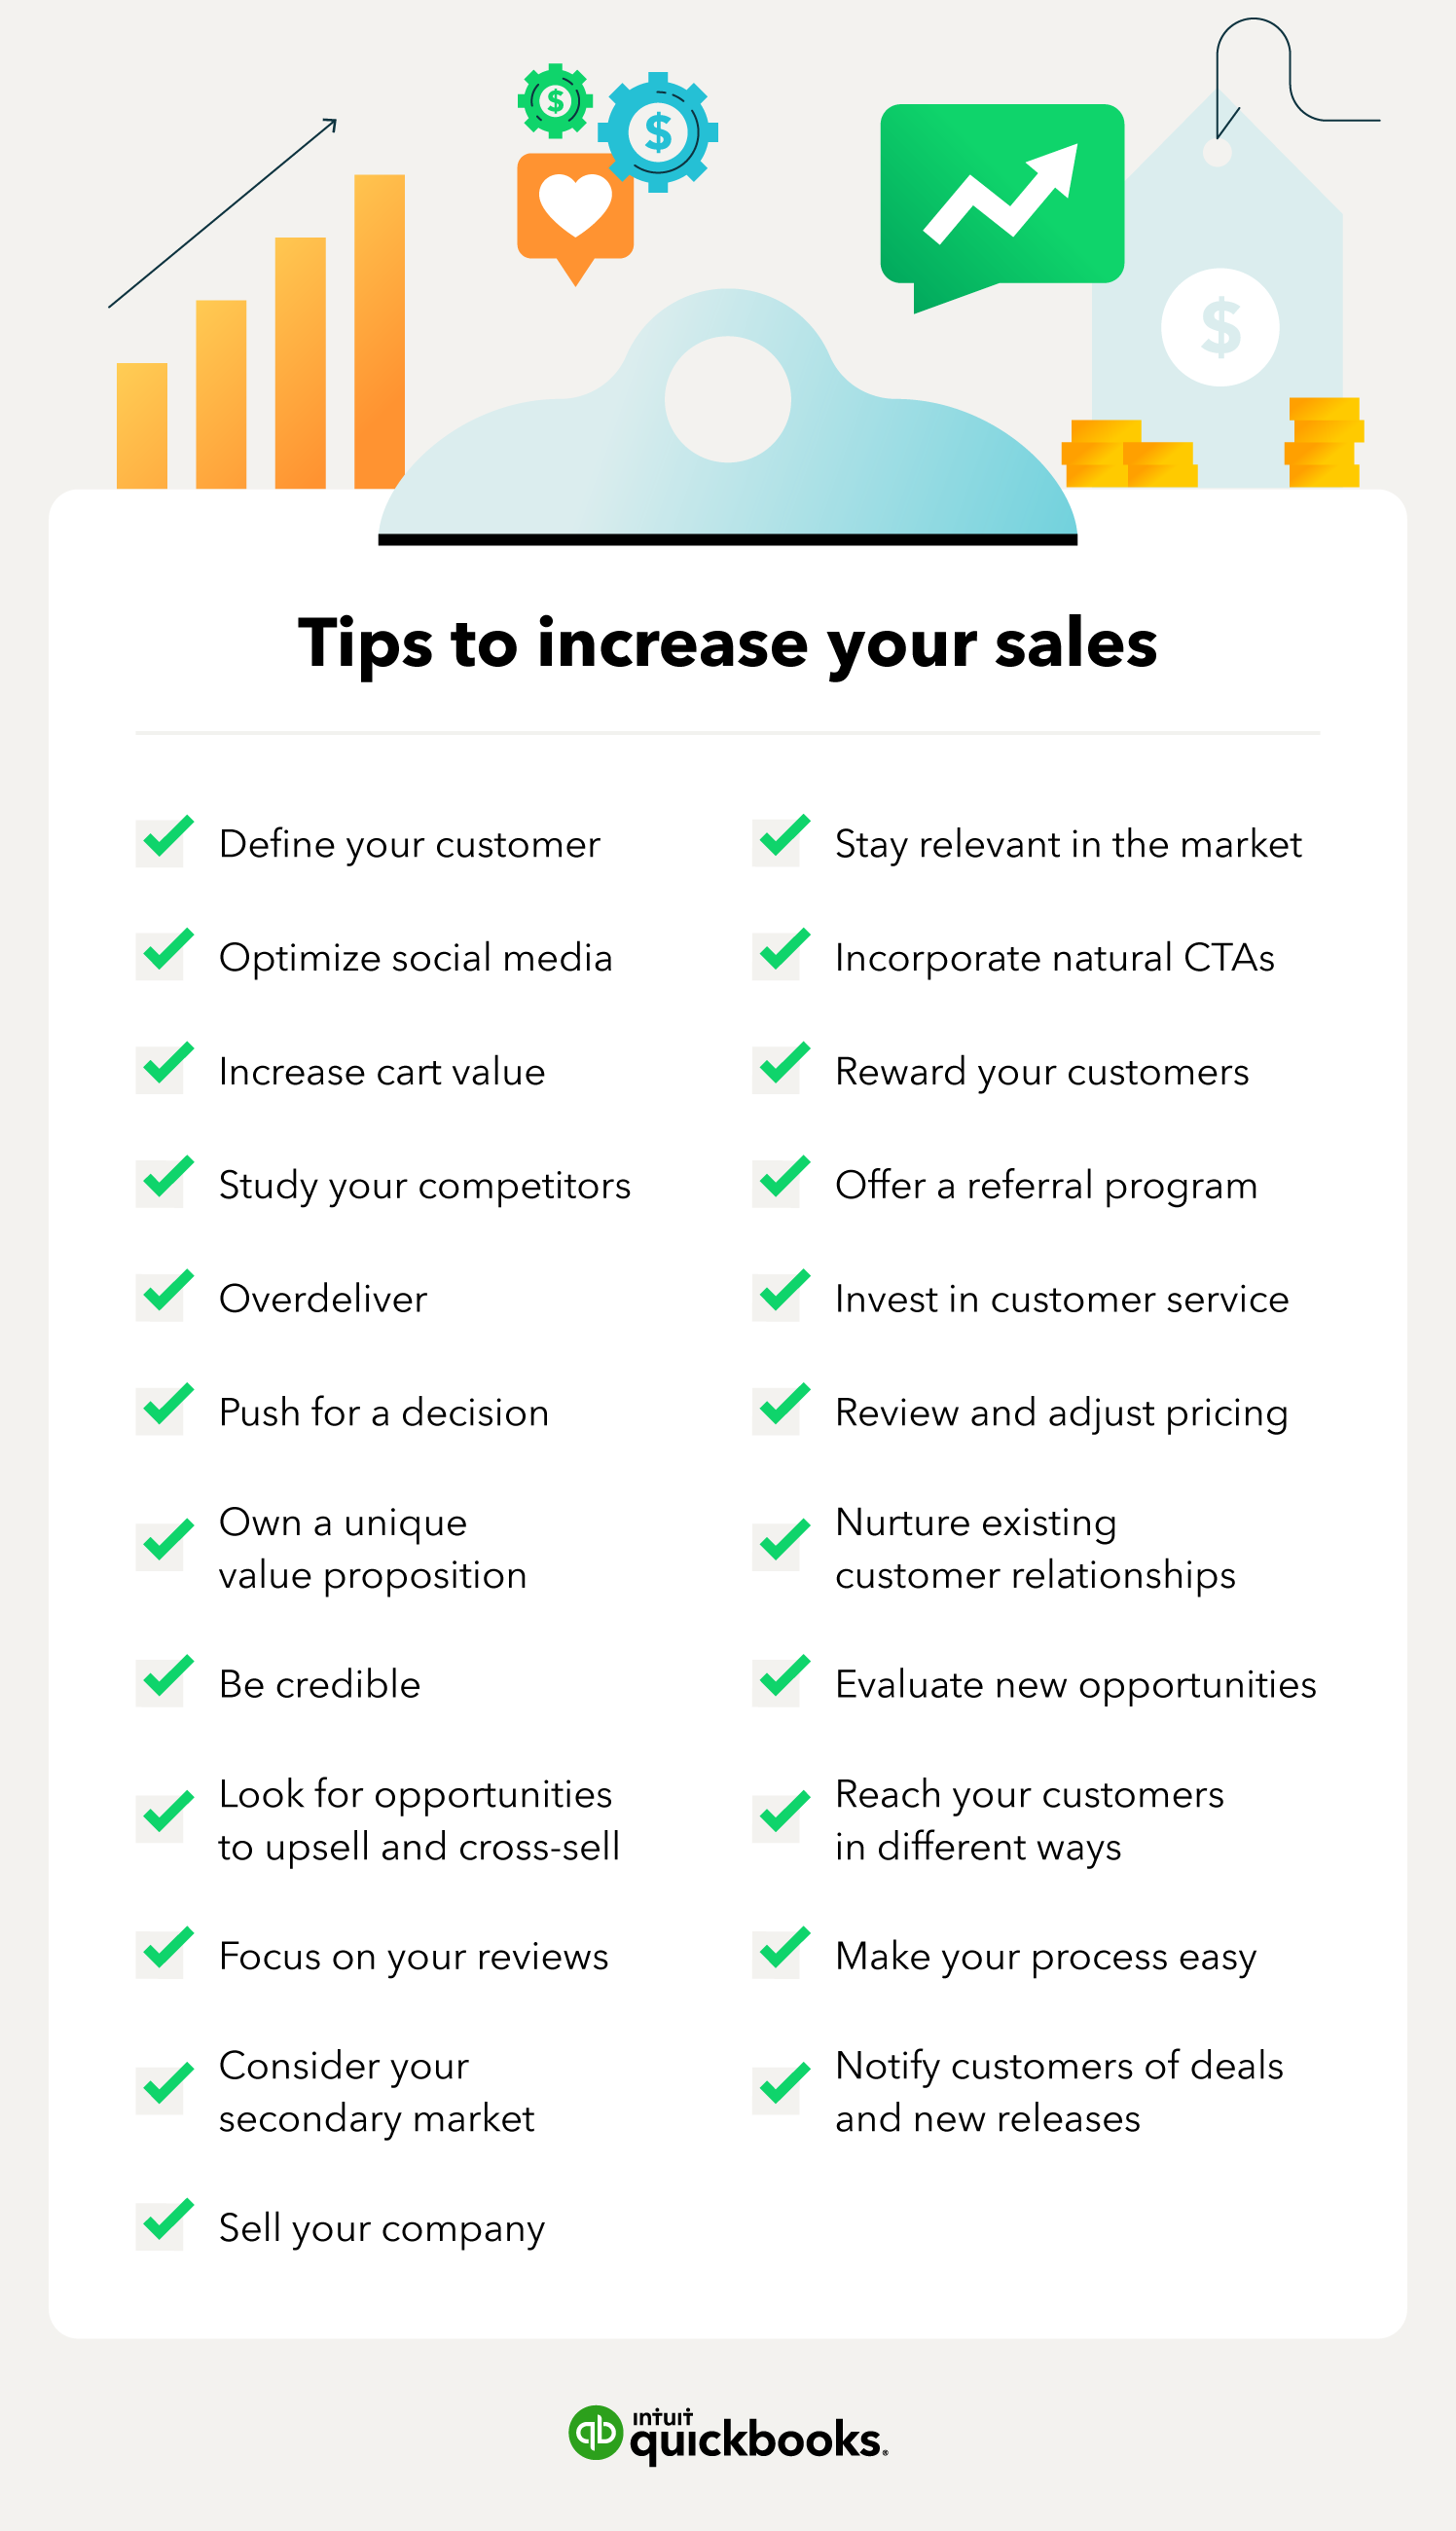 Checklist indicating the different strategies to increase sales, including investing in customer service and reviewing prices.